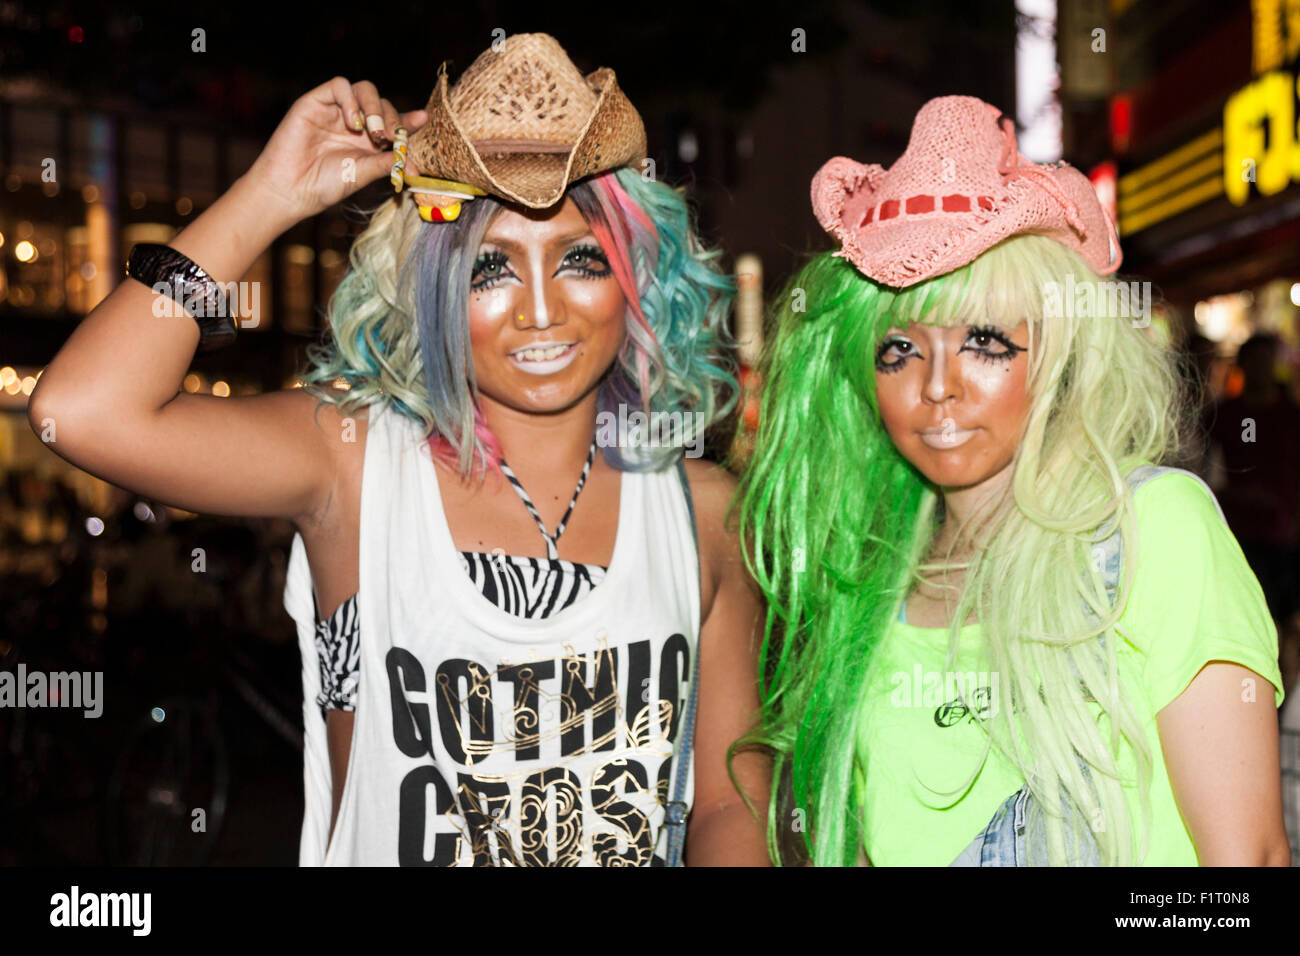 (L to R) Erimokkori of the Ganguro Cafe & Bar with a female customer who has been transformed into a ganguro girl pose of pictures in the Shibuya shopping area on September 4, 2015. Ganguro is an alternative Japanese fashion trend which started in the mid-1990s where young women, rebelling against the traditional idea of Japanese beauty, wore colorful make-up and clothes and had dark-skin. 10 Ganguro fashion girls work in the new bar, which offers original Ganguro Balls (fried takoyaki style sausage balls in black squid ink batter) on its menu. Ganguro Café & Bar also offers special service Stock Photo